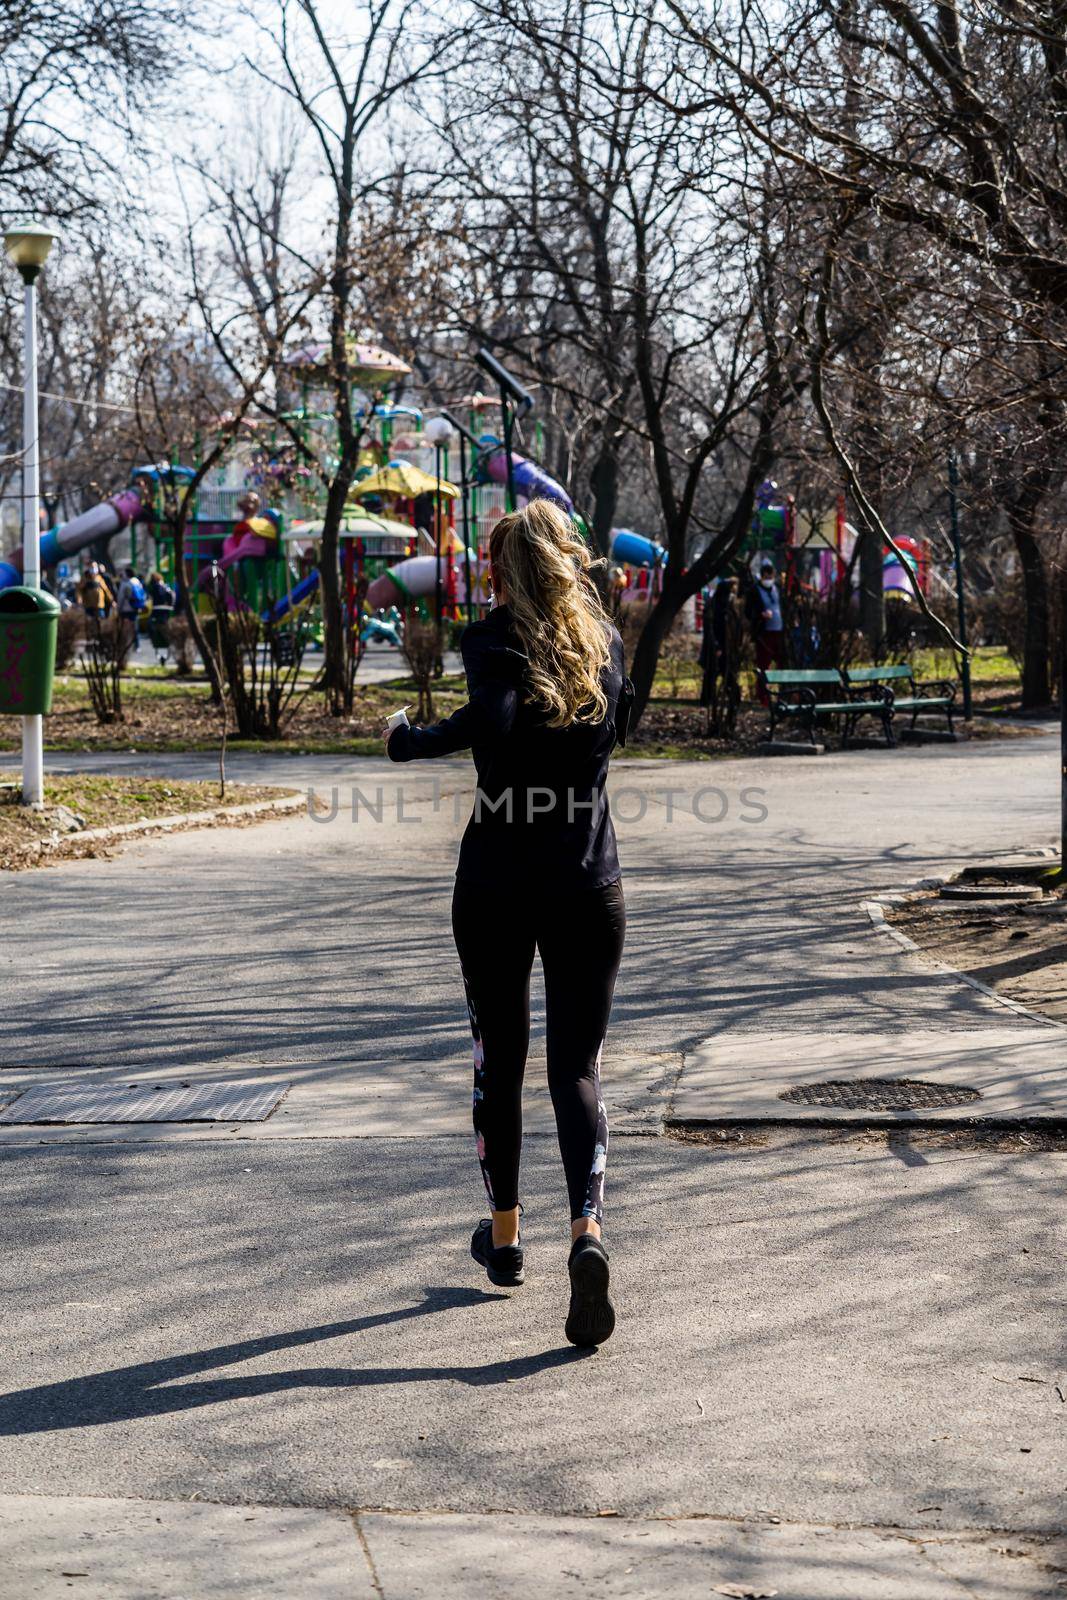 Jogging, running in the city park. Healthy lifestyle, outdoor physical activity and fitness concept in Bucharest, Romania, 2021